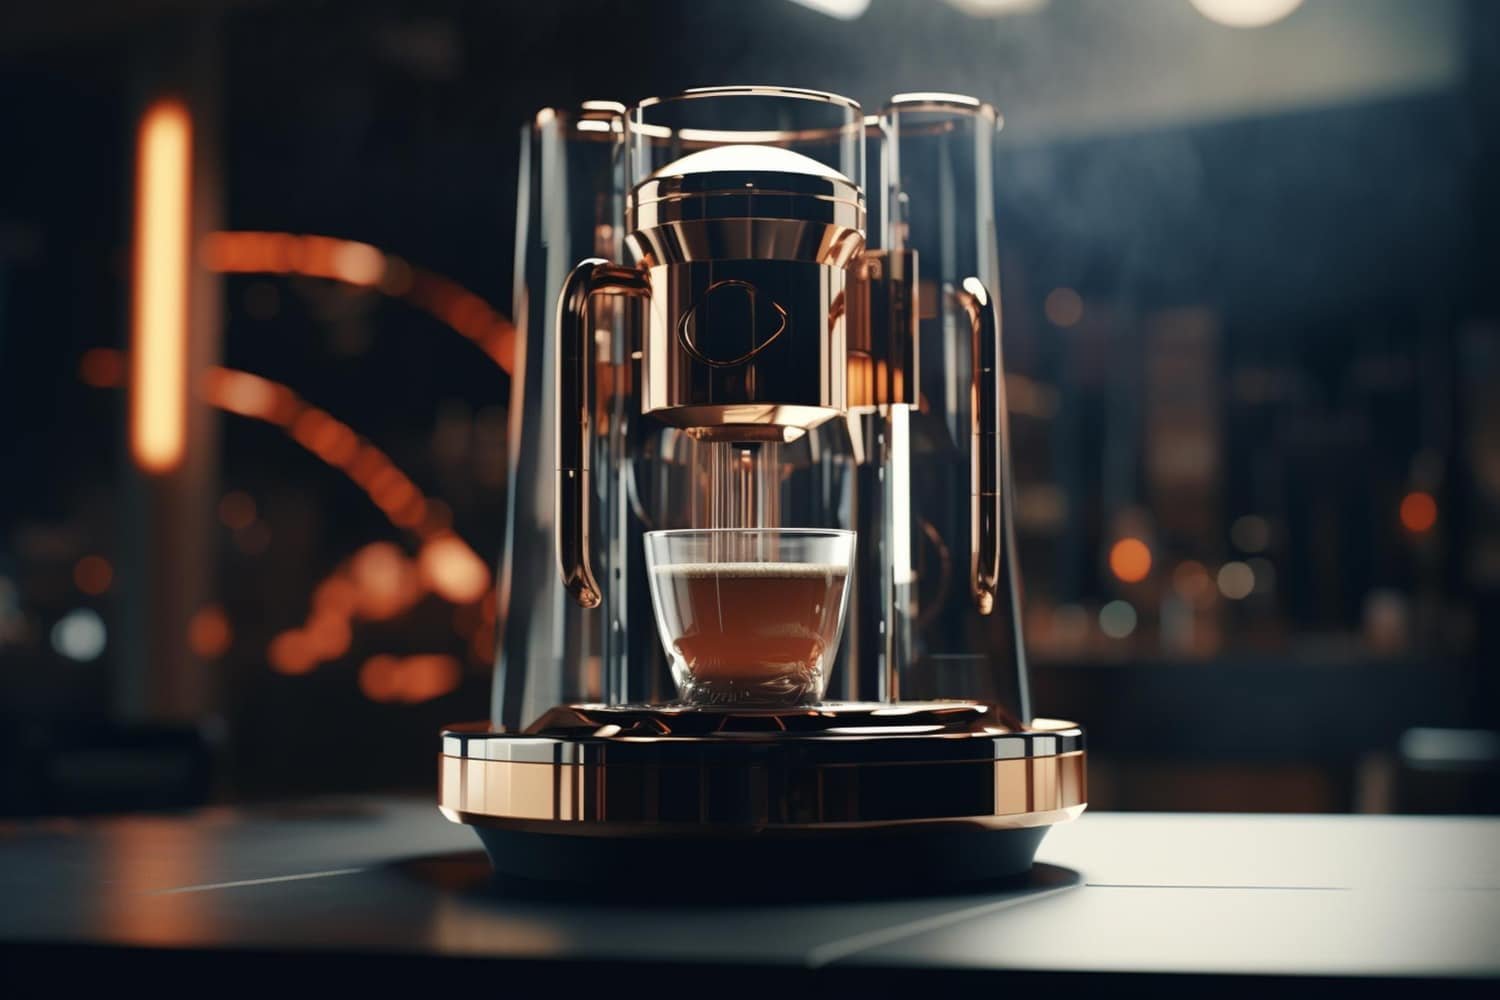 Brew Coffee Perfectly With Planetary Design’s Innovative Coffee Makers And Accessories